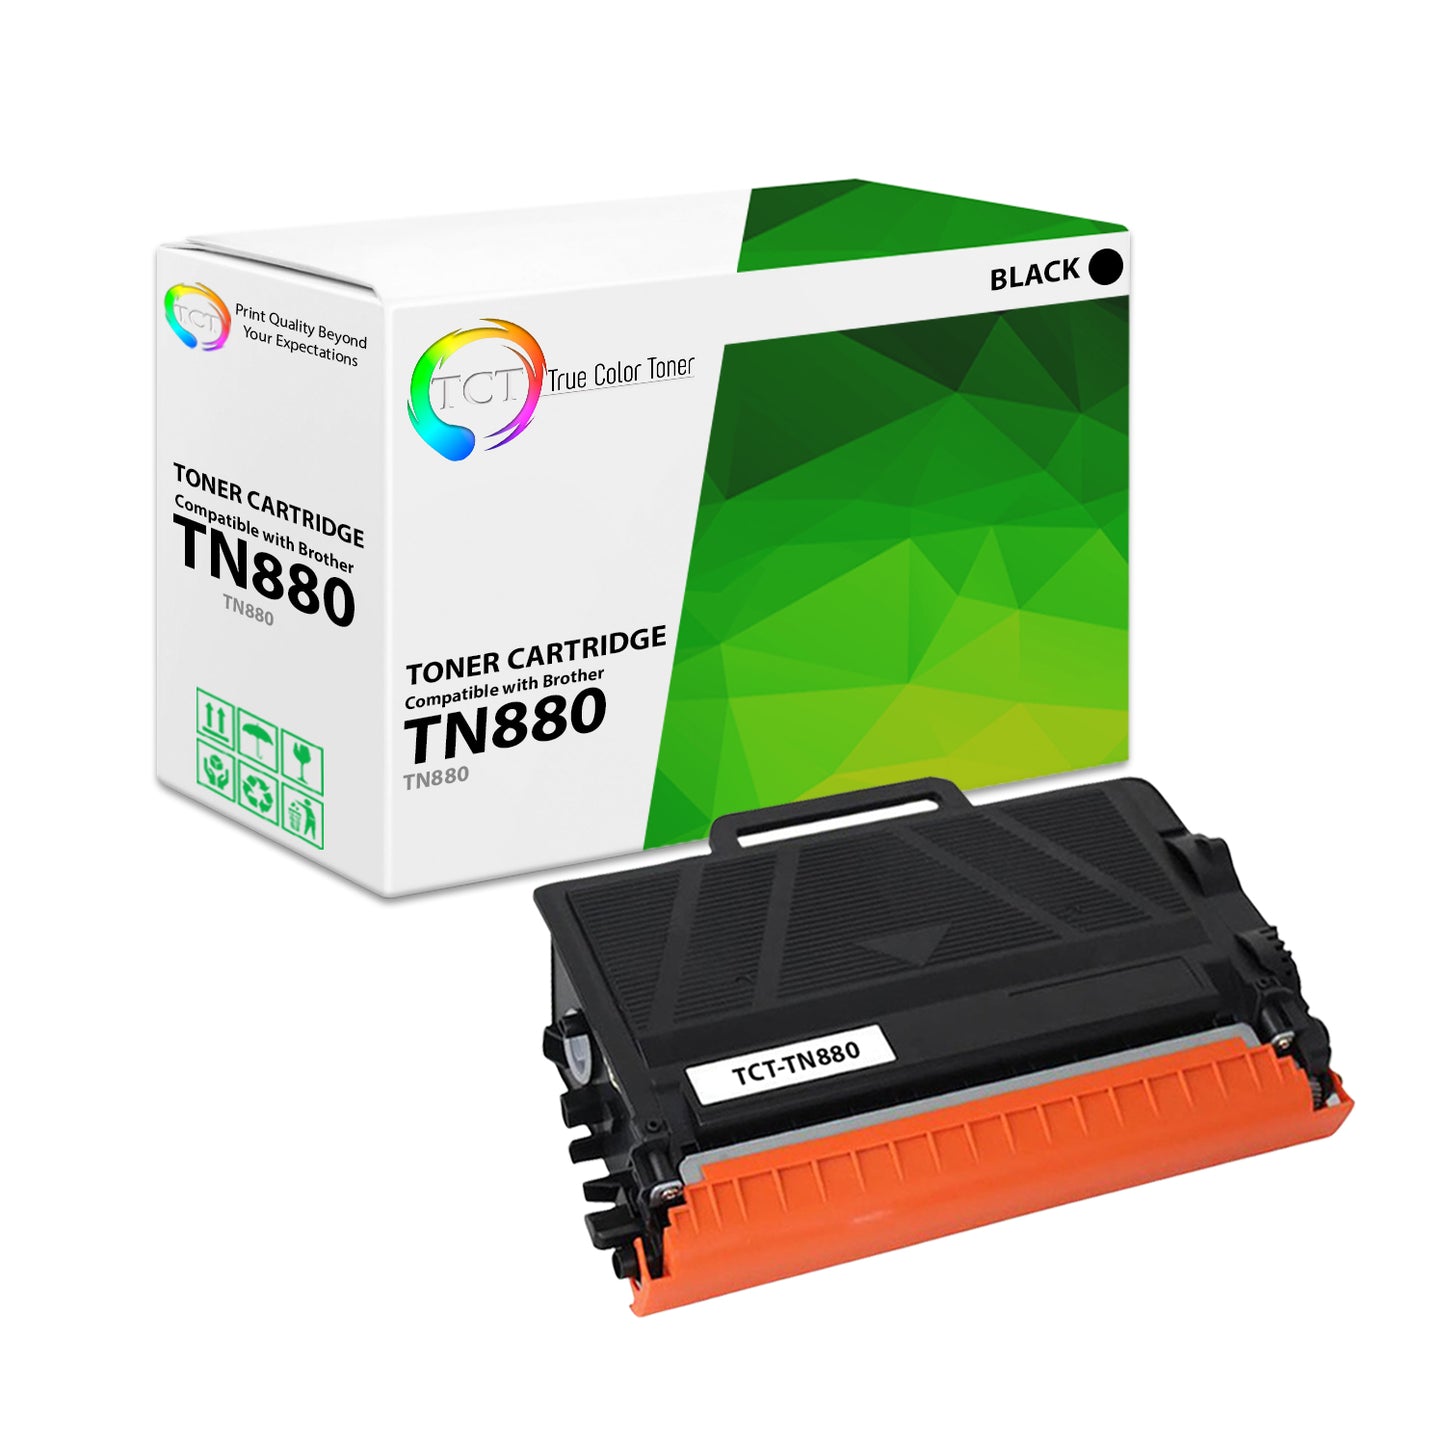 TCT Compatible Super HY Toner Cartridge Replacement for the Brother TN880 Series - 1 Pack Black